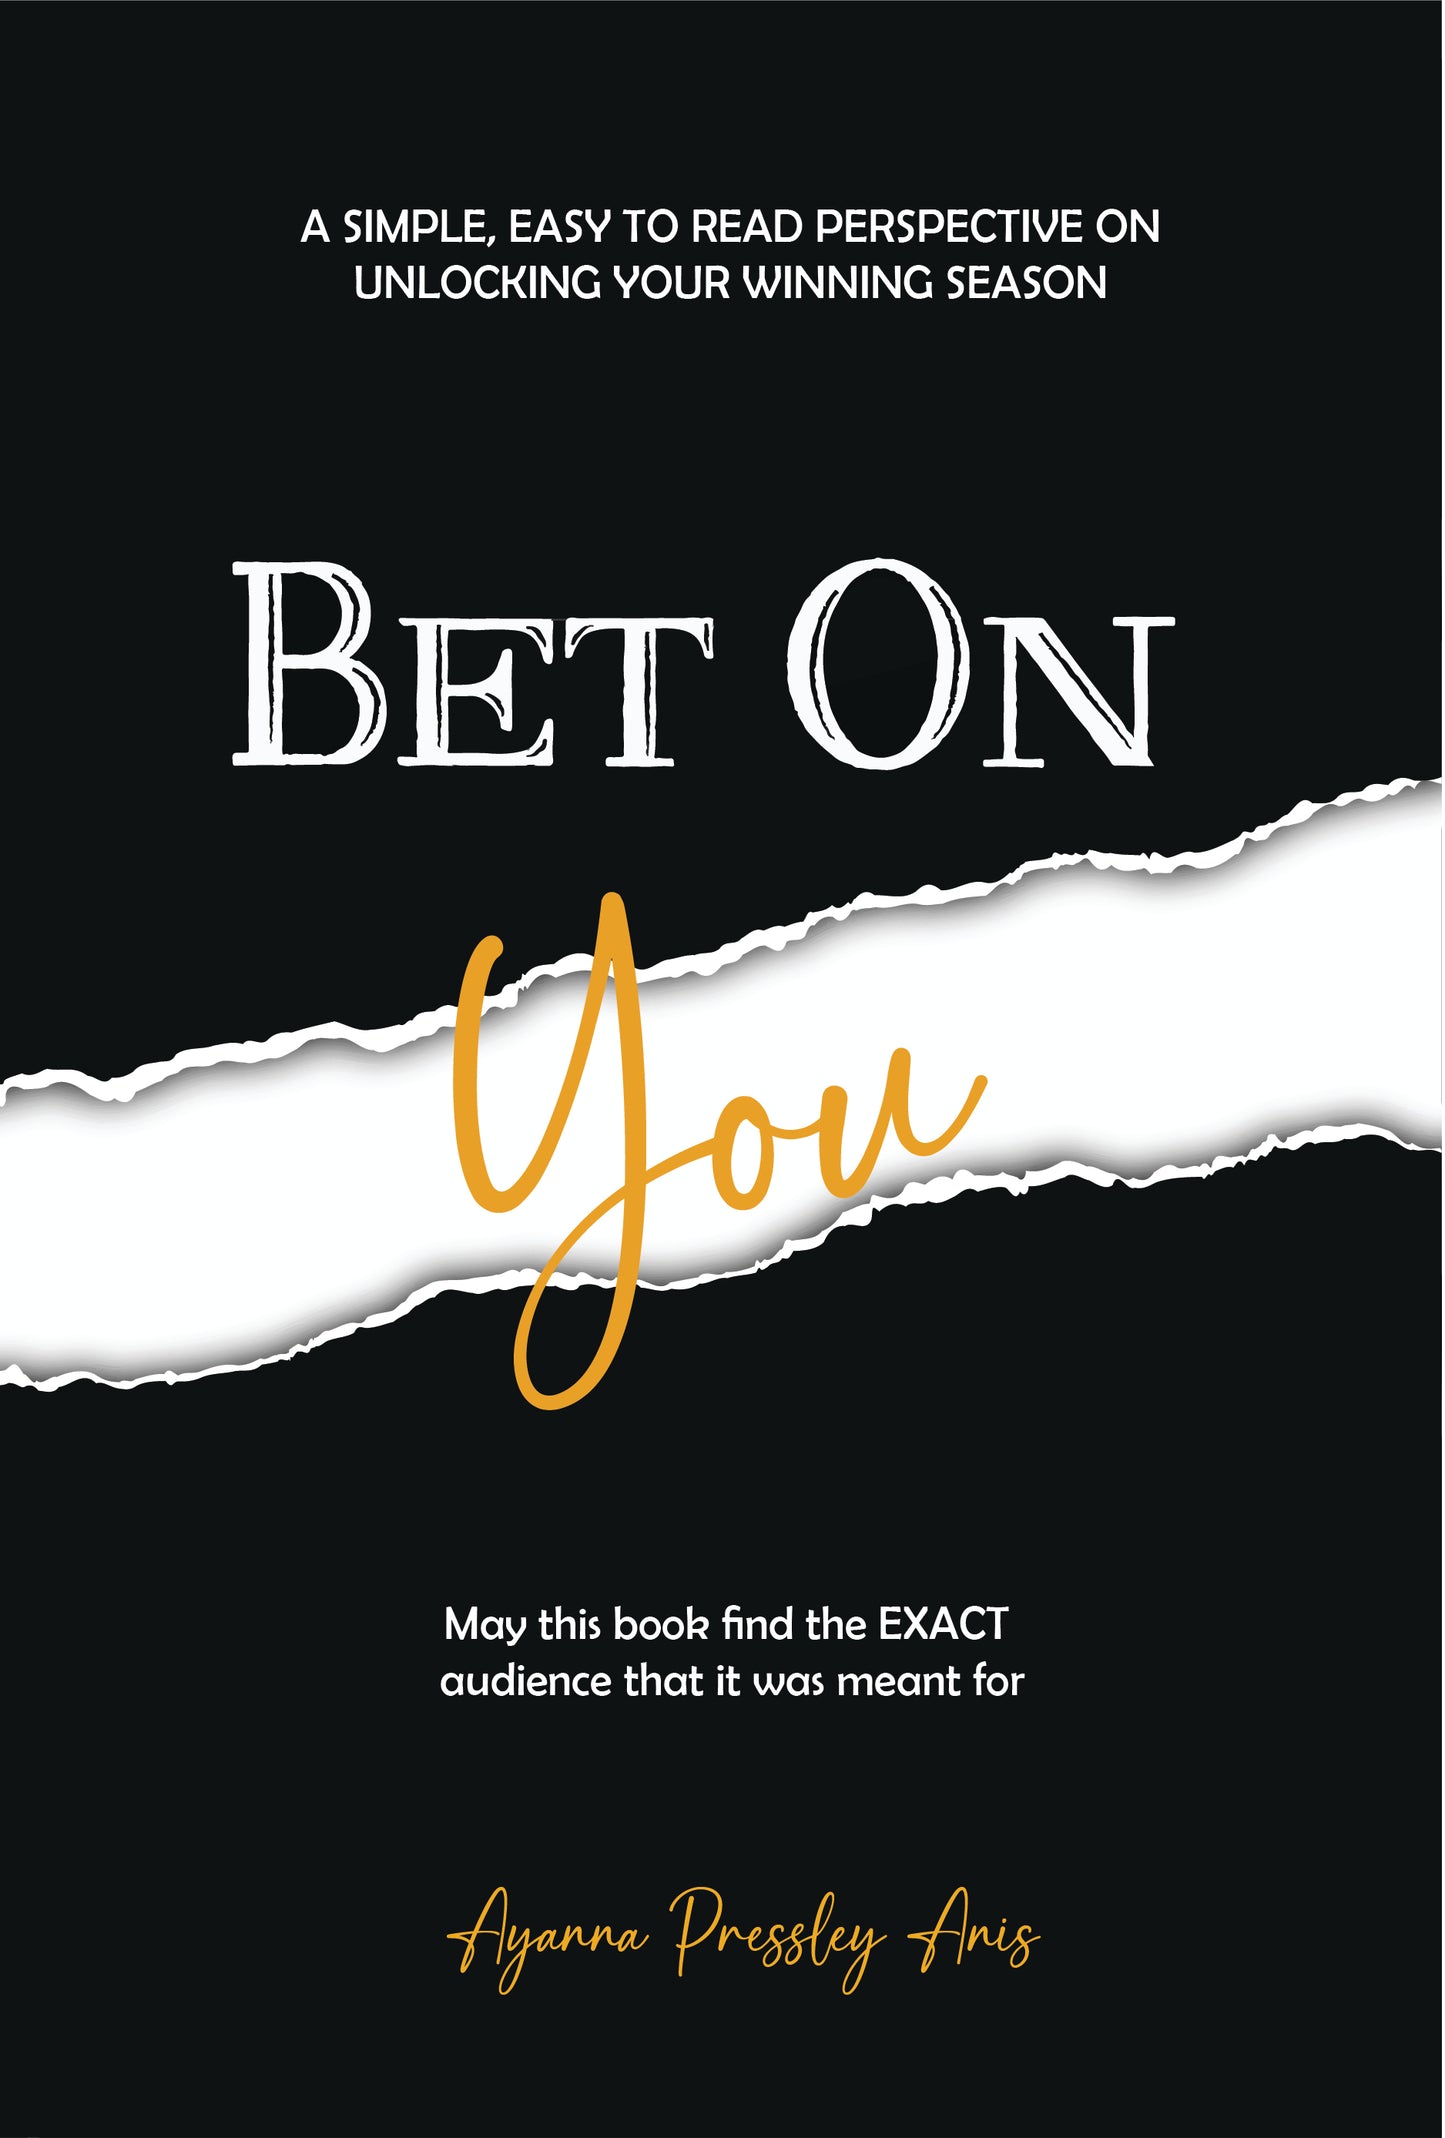 BET ON YOU Is Now Available On Amazon!